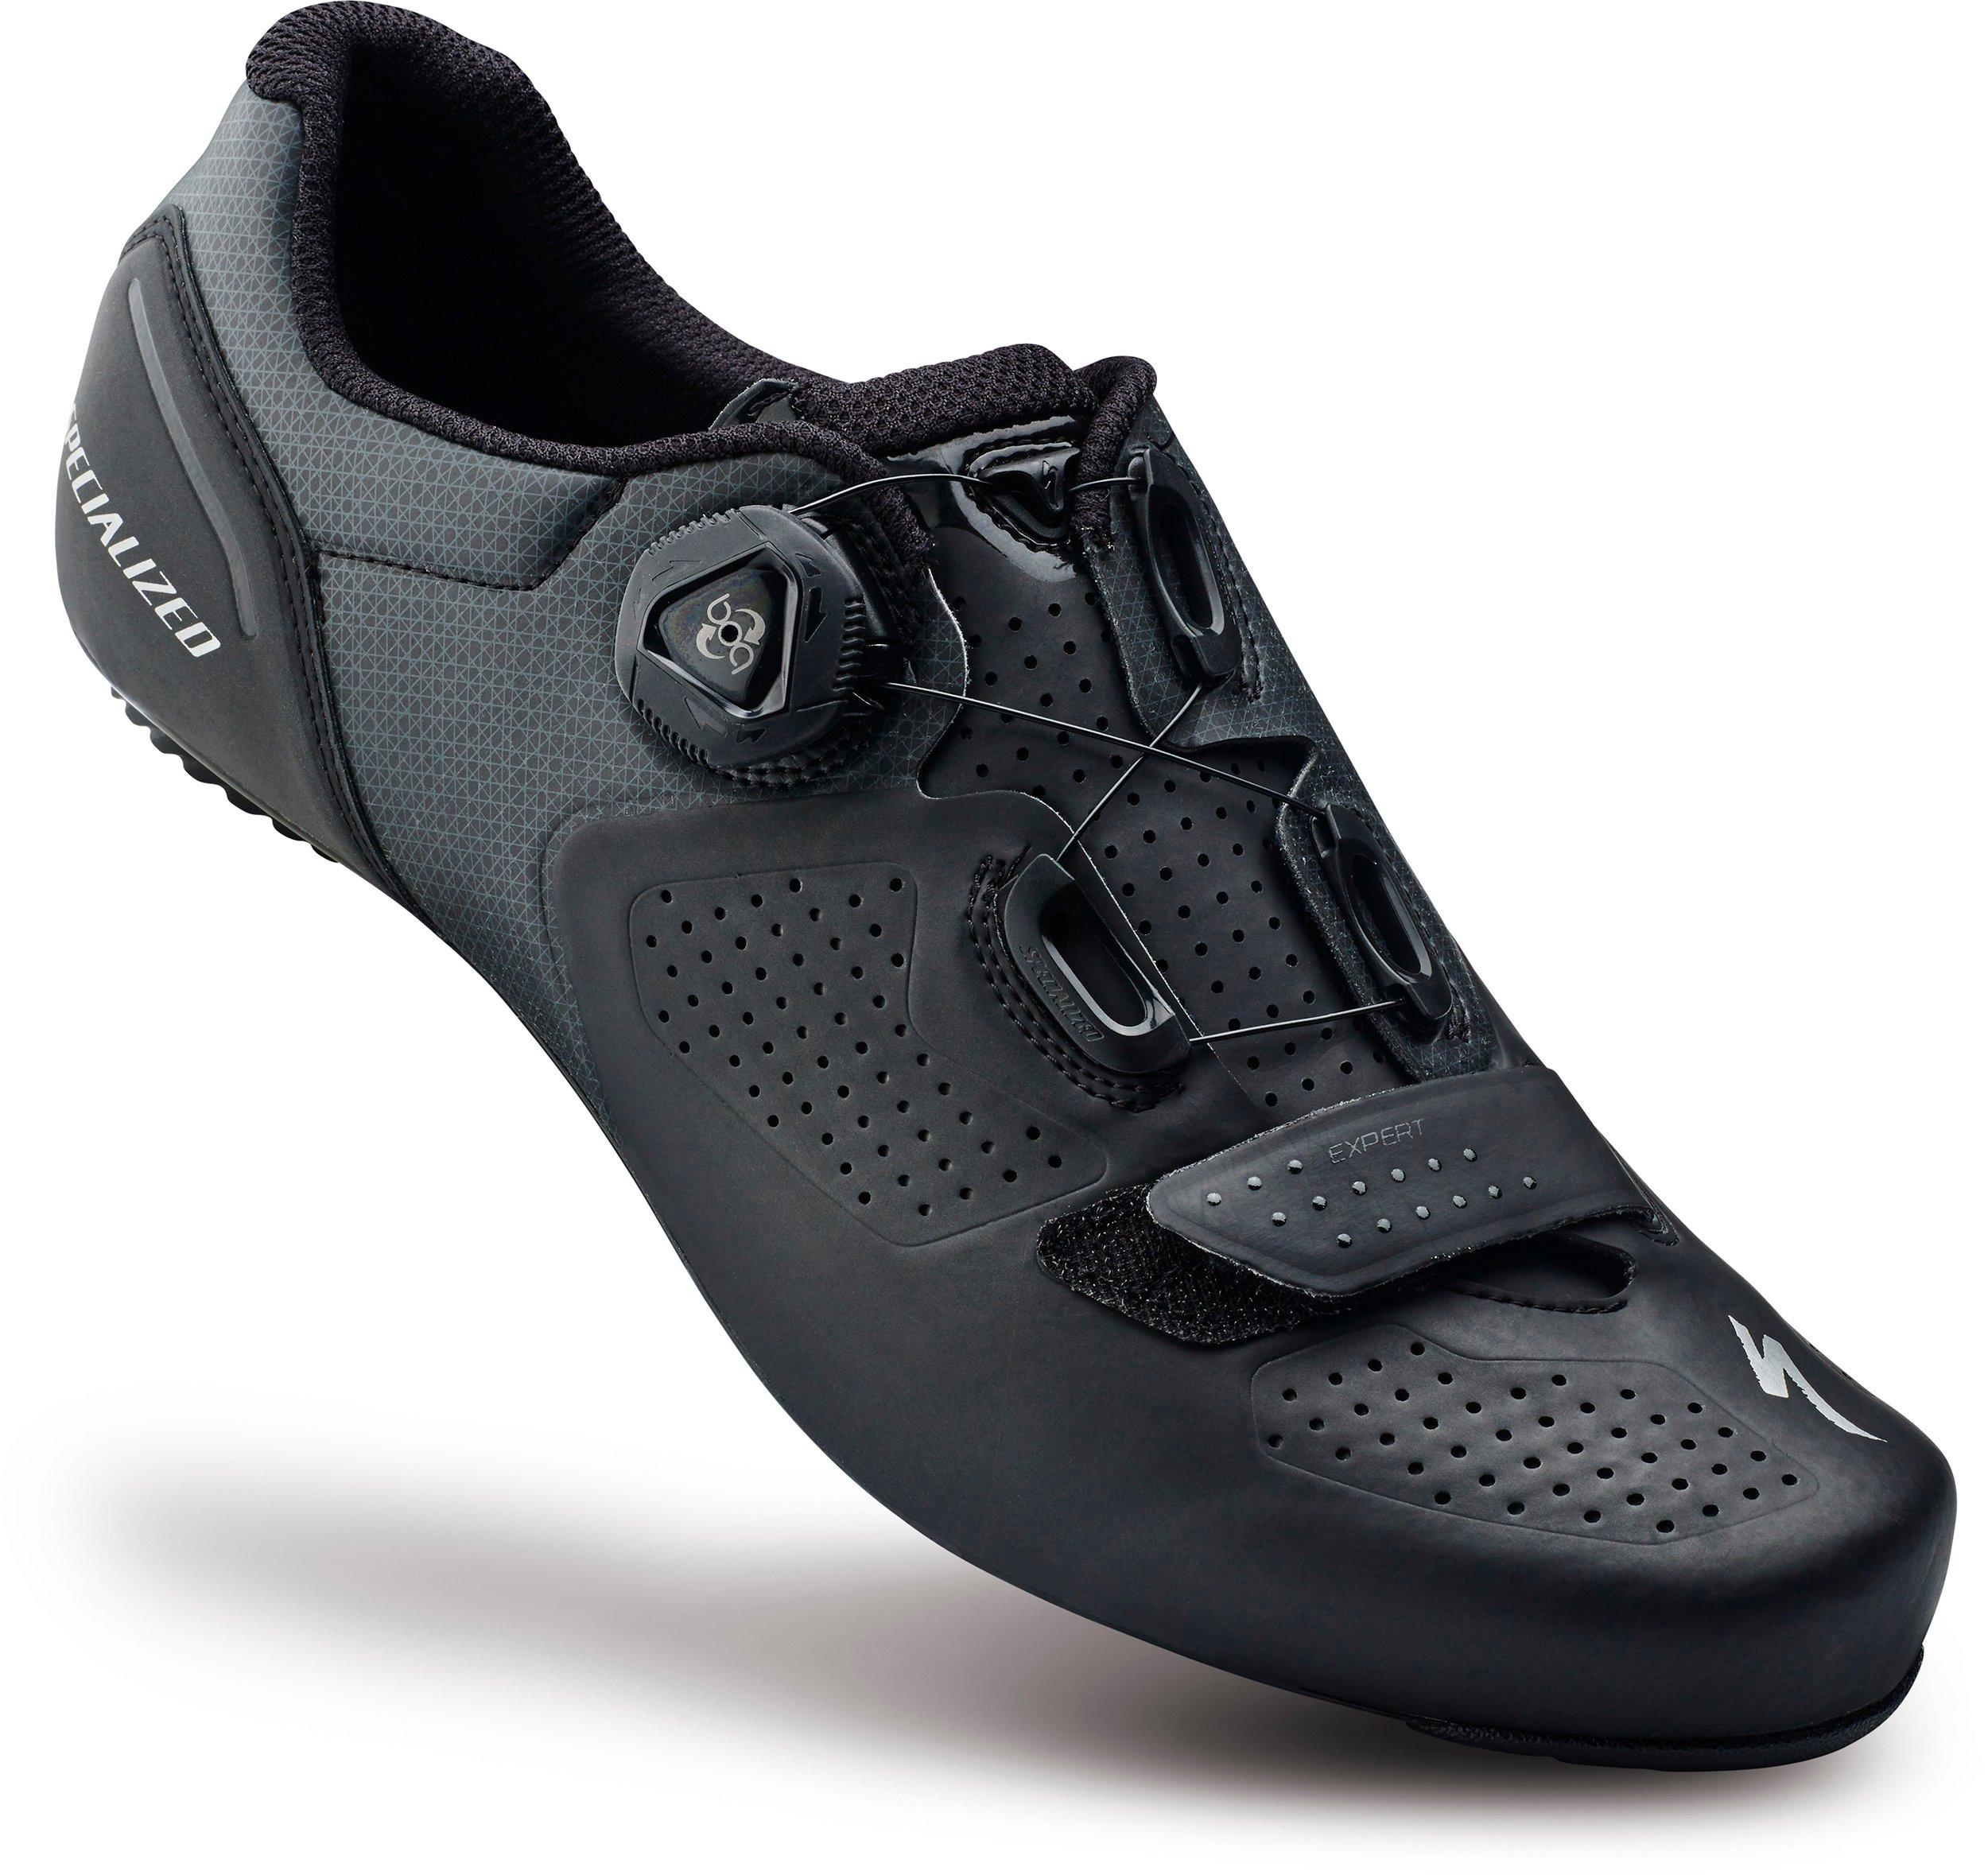 Expert Road Shoes | Specialized.com